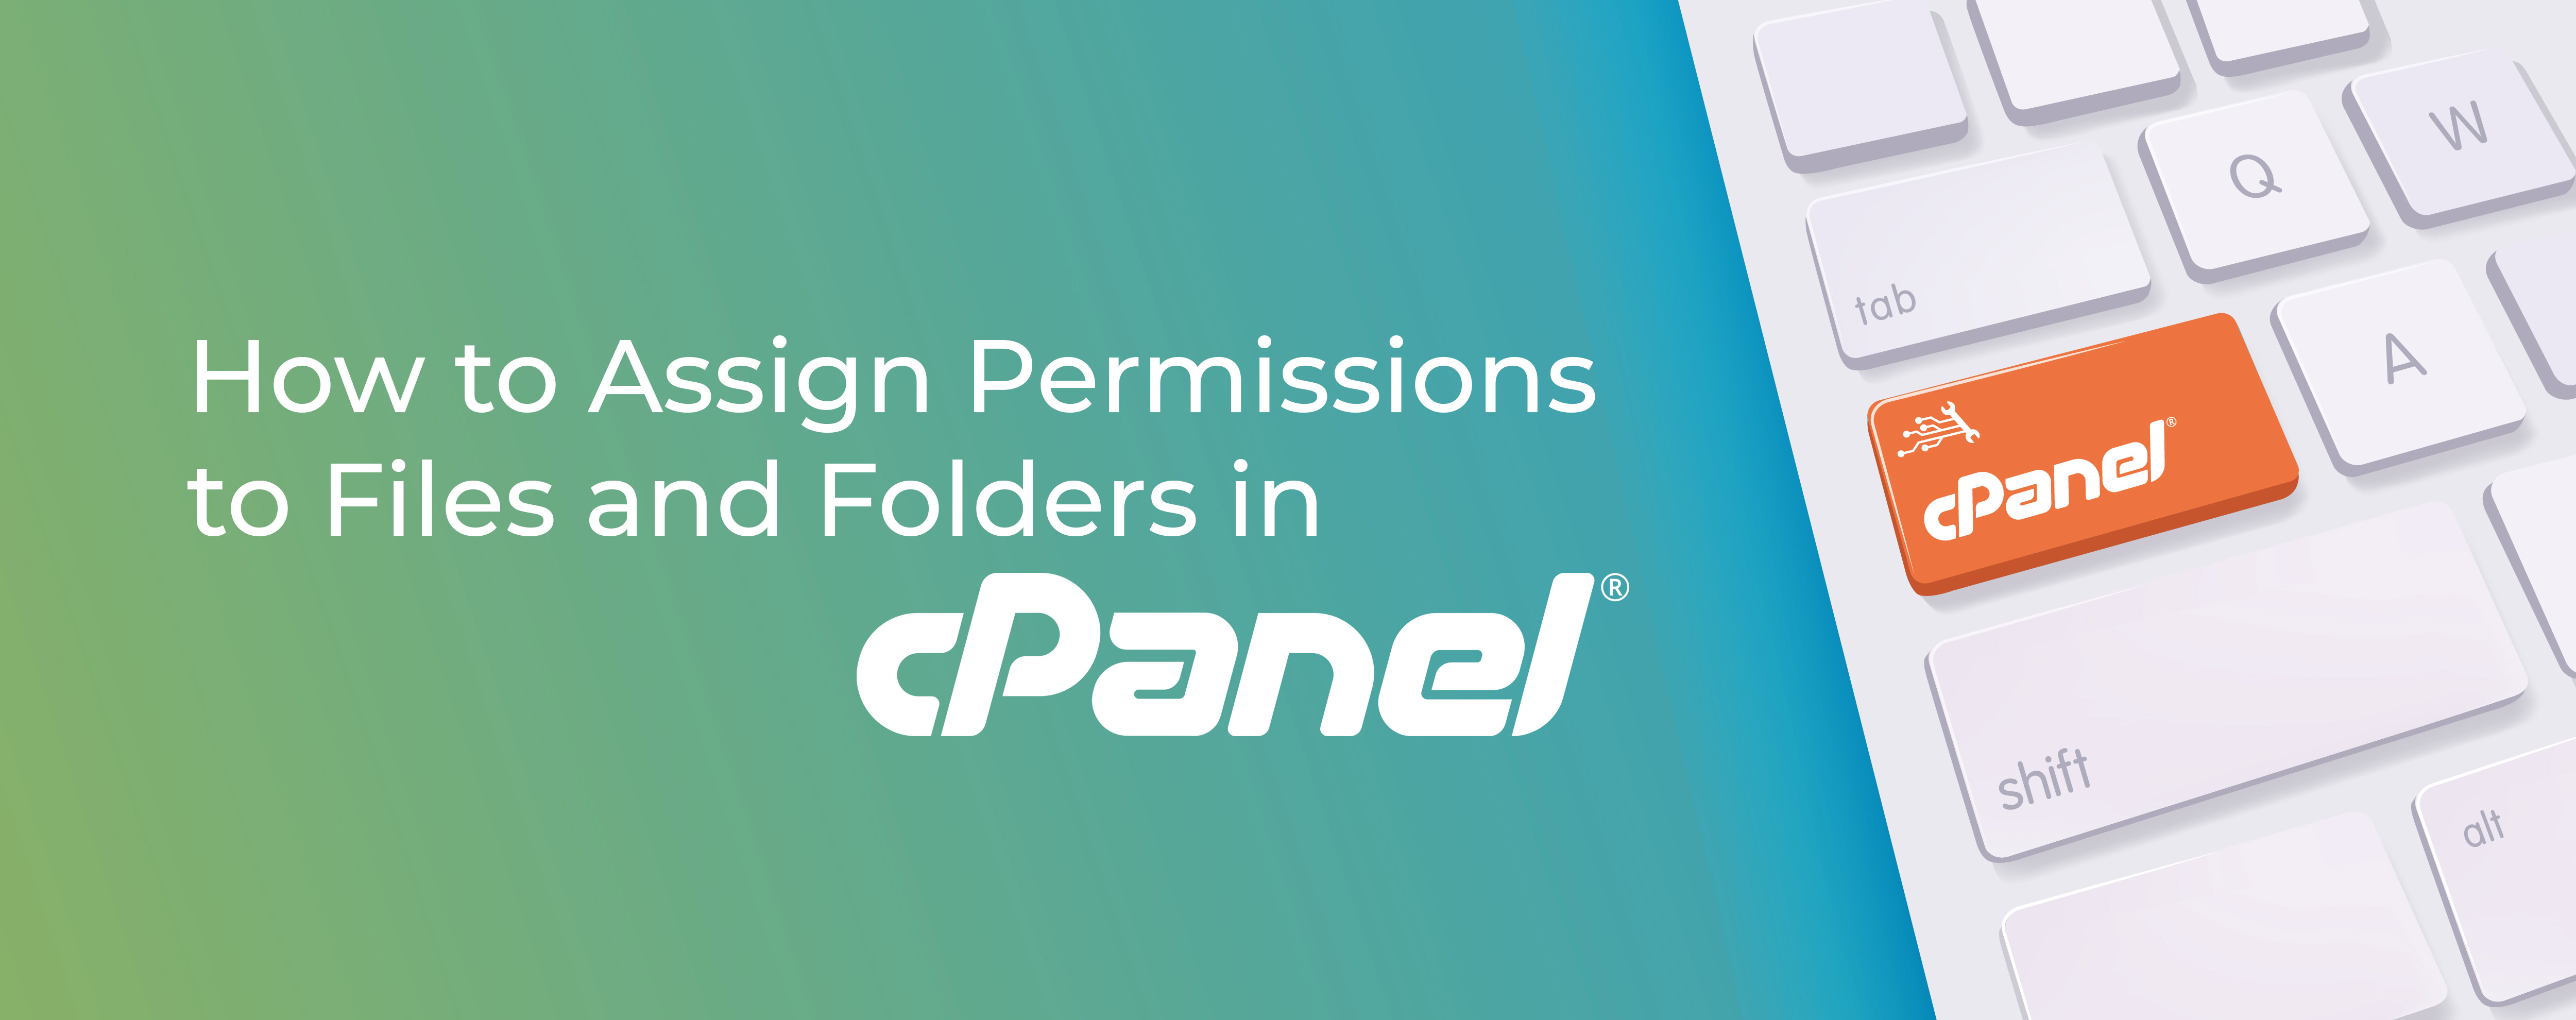 How to Assign Permissions to Files and Folders in cPanel